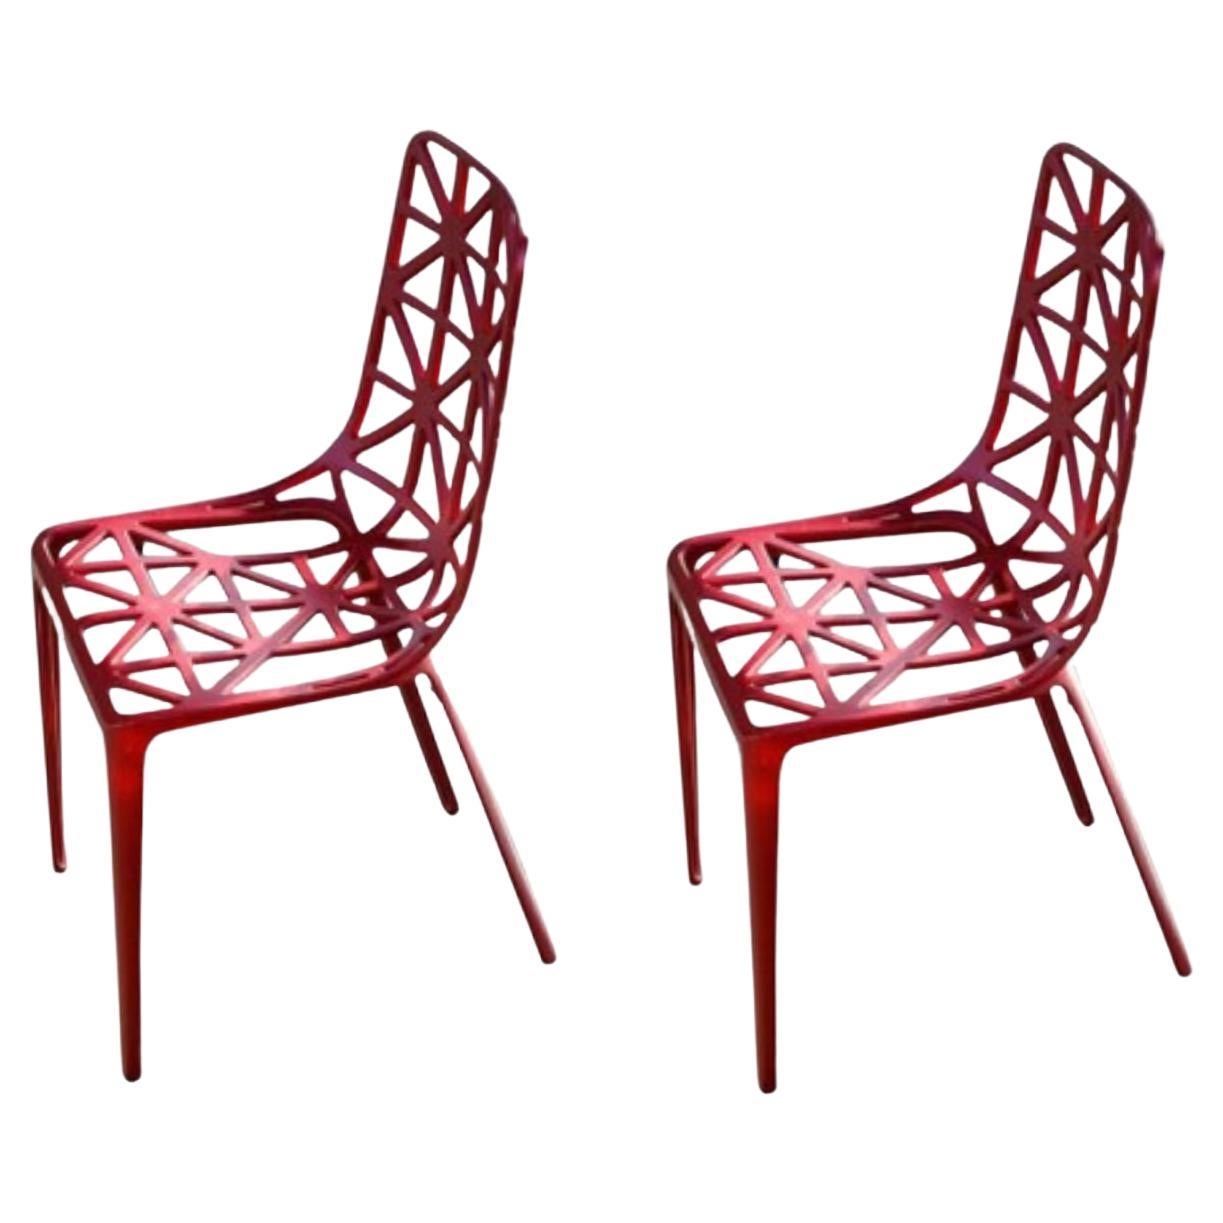 Set of 2 Red New Eiffel Tower Chairs by Alain Moatti